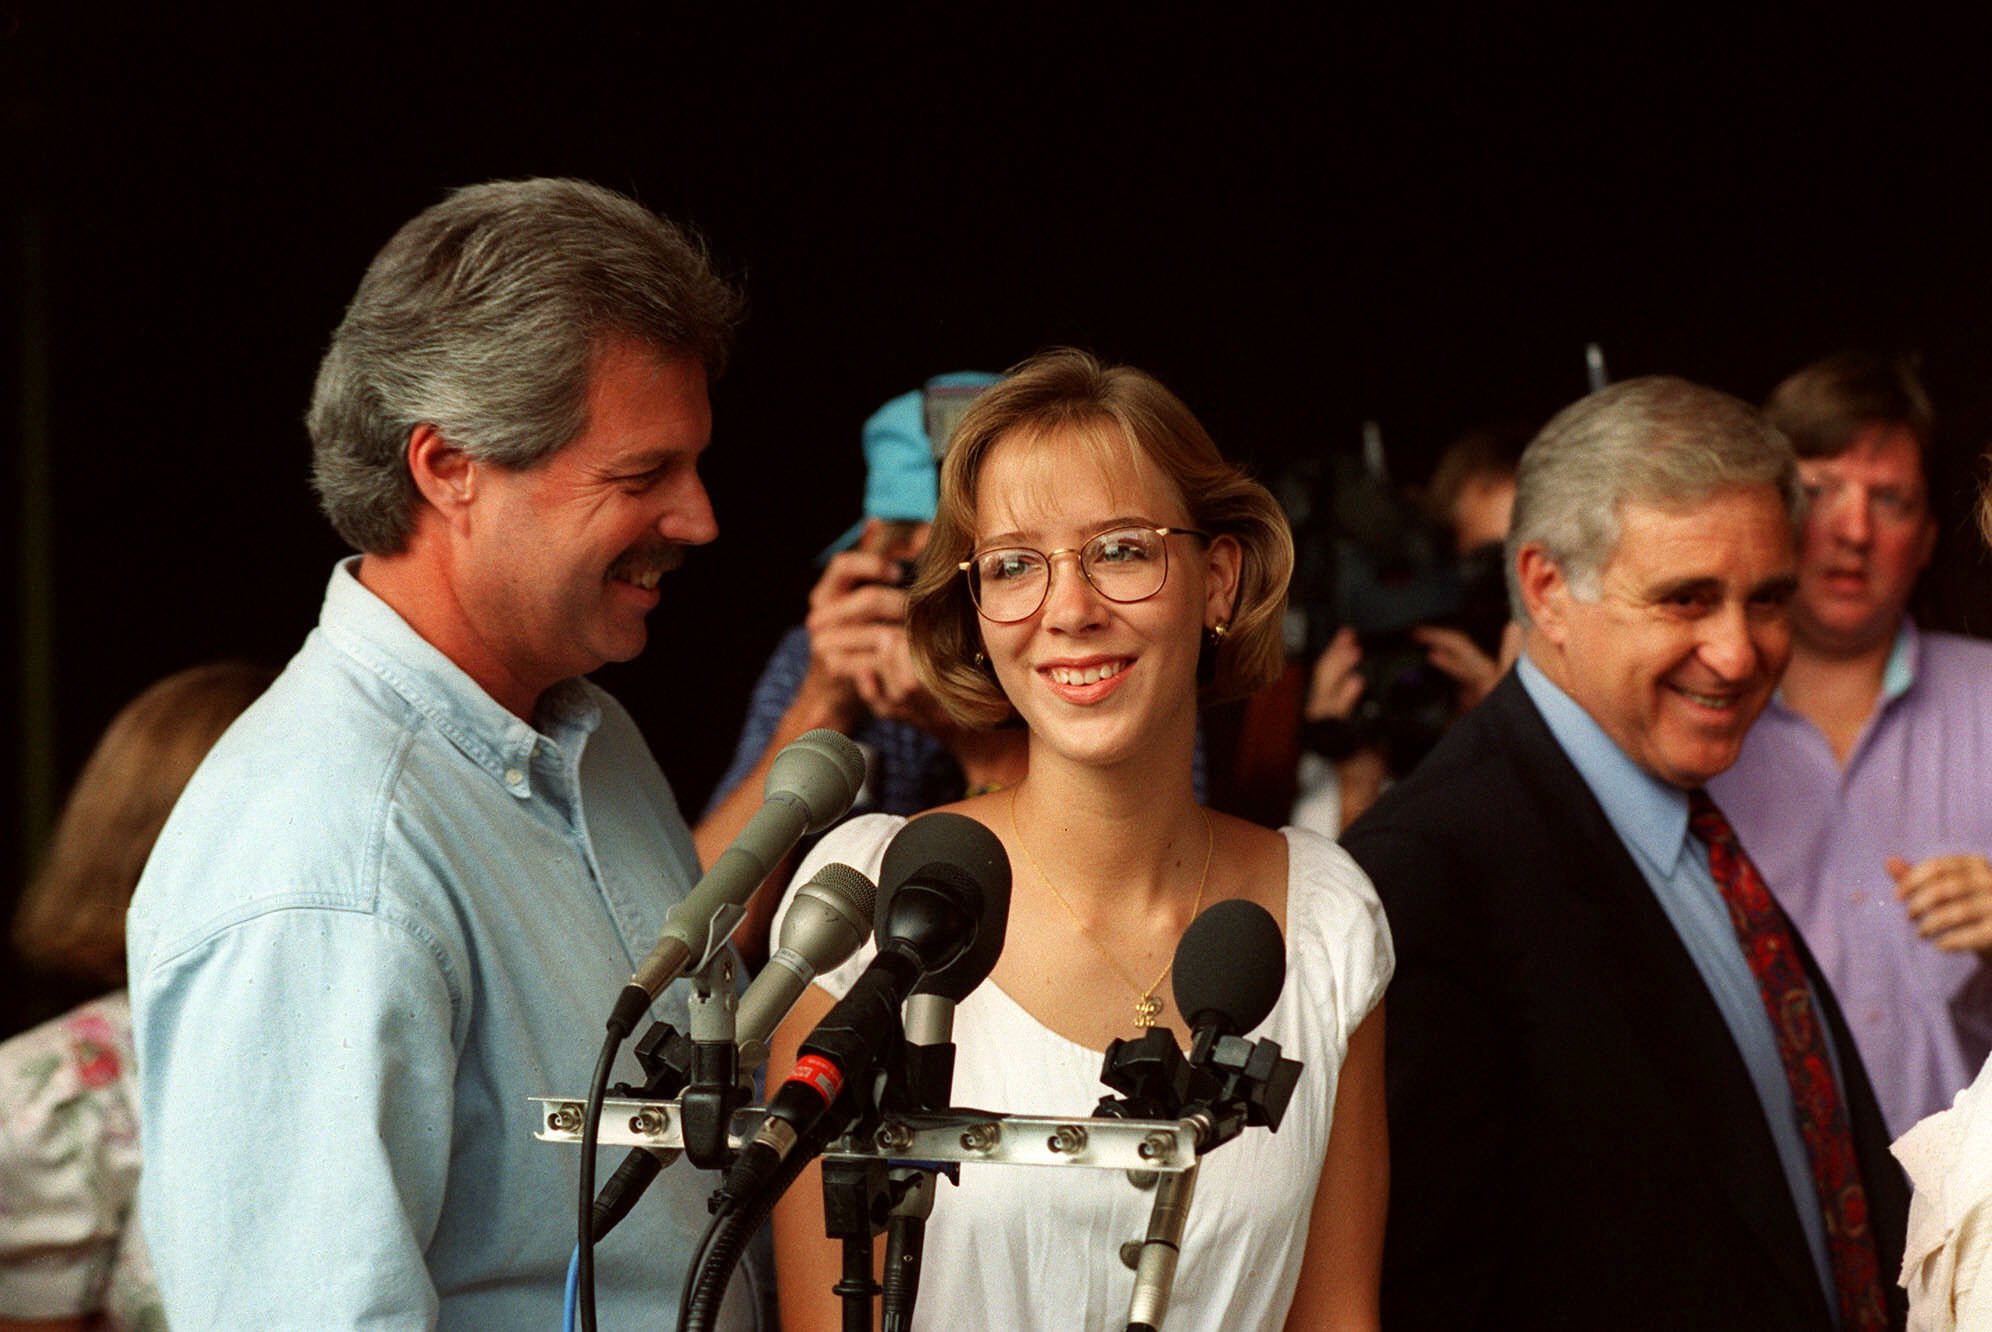 PHOTO: Kimberly Mays, center, holds a press conference with Robert Mays by her side Friday, Aug. 20,1993, in Sarasota, Fla.